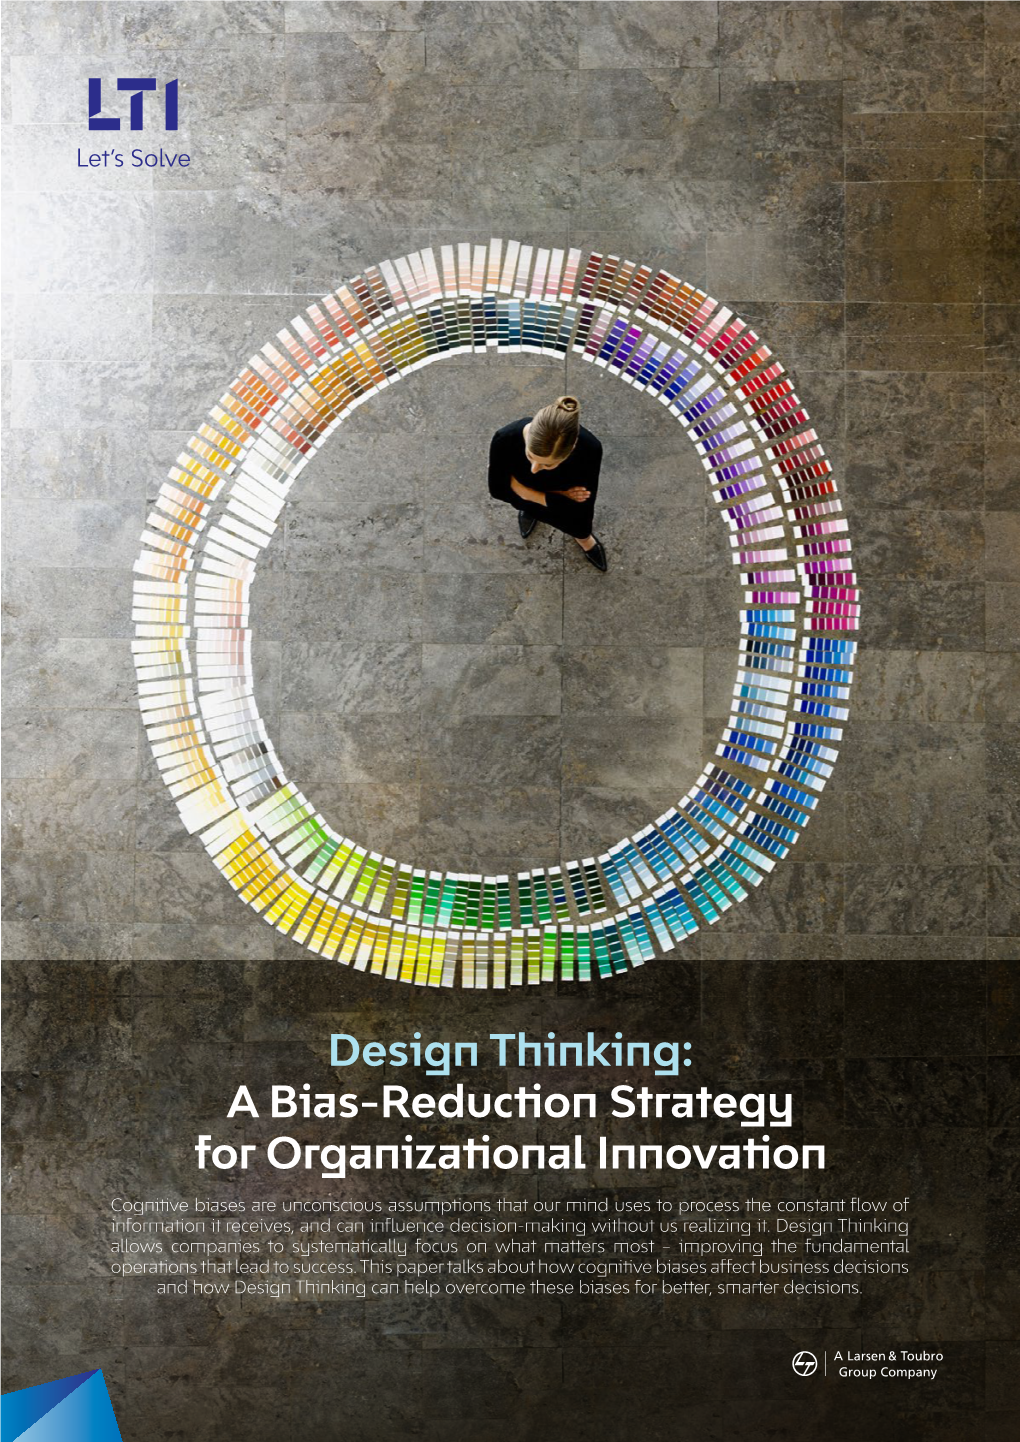 Design Thinking: a Bias-Reduction Strategy for Organizational Innovation